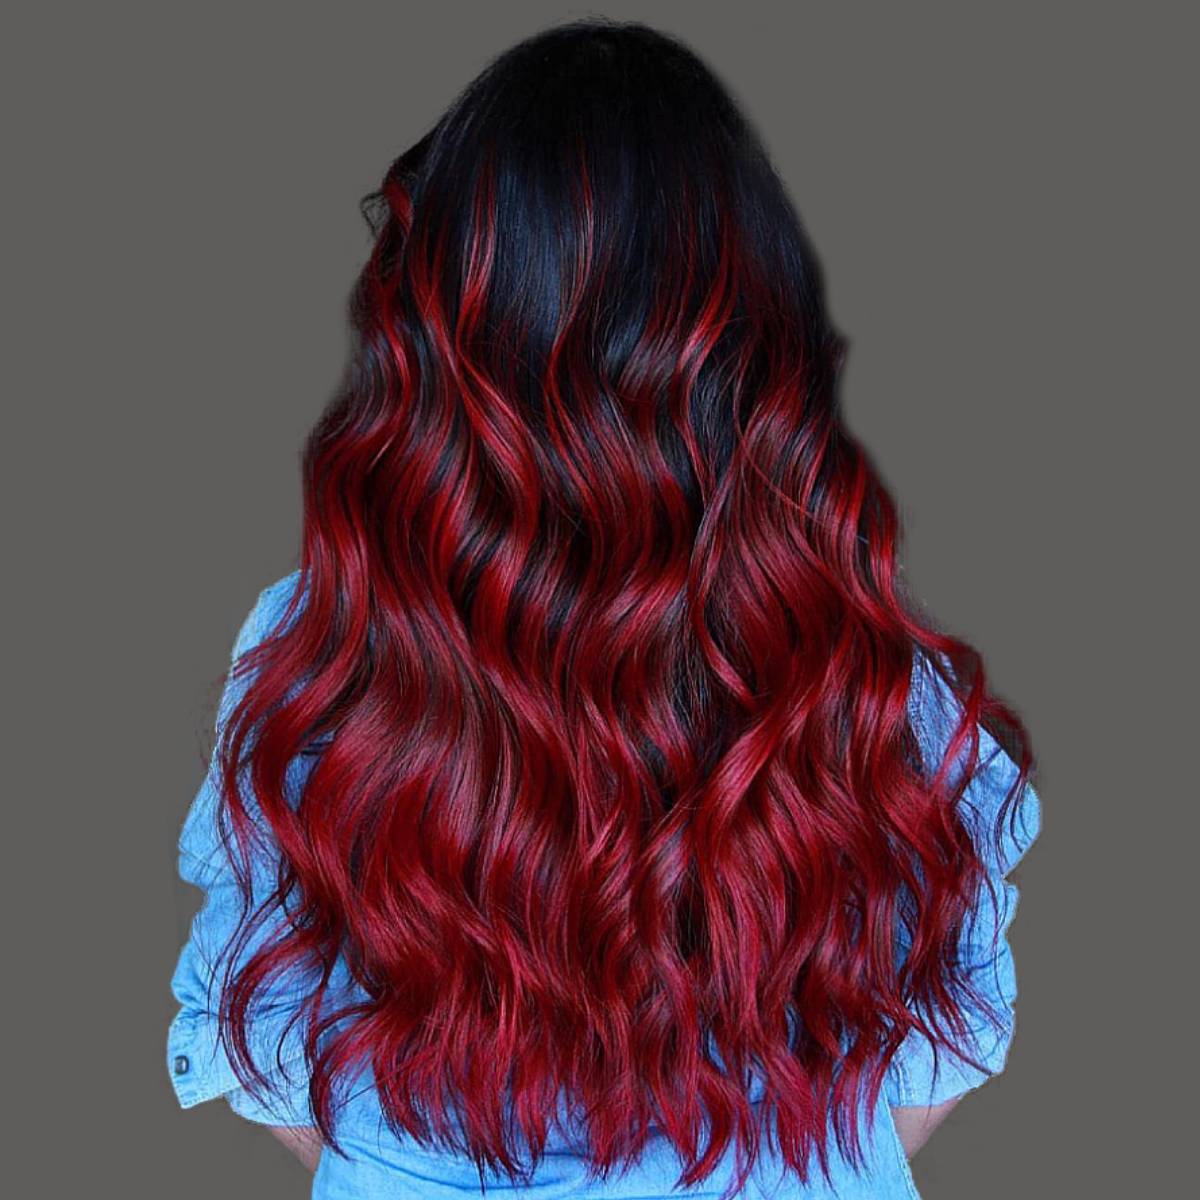 How to Dye Hair Perfect Red/Burgundy